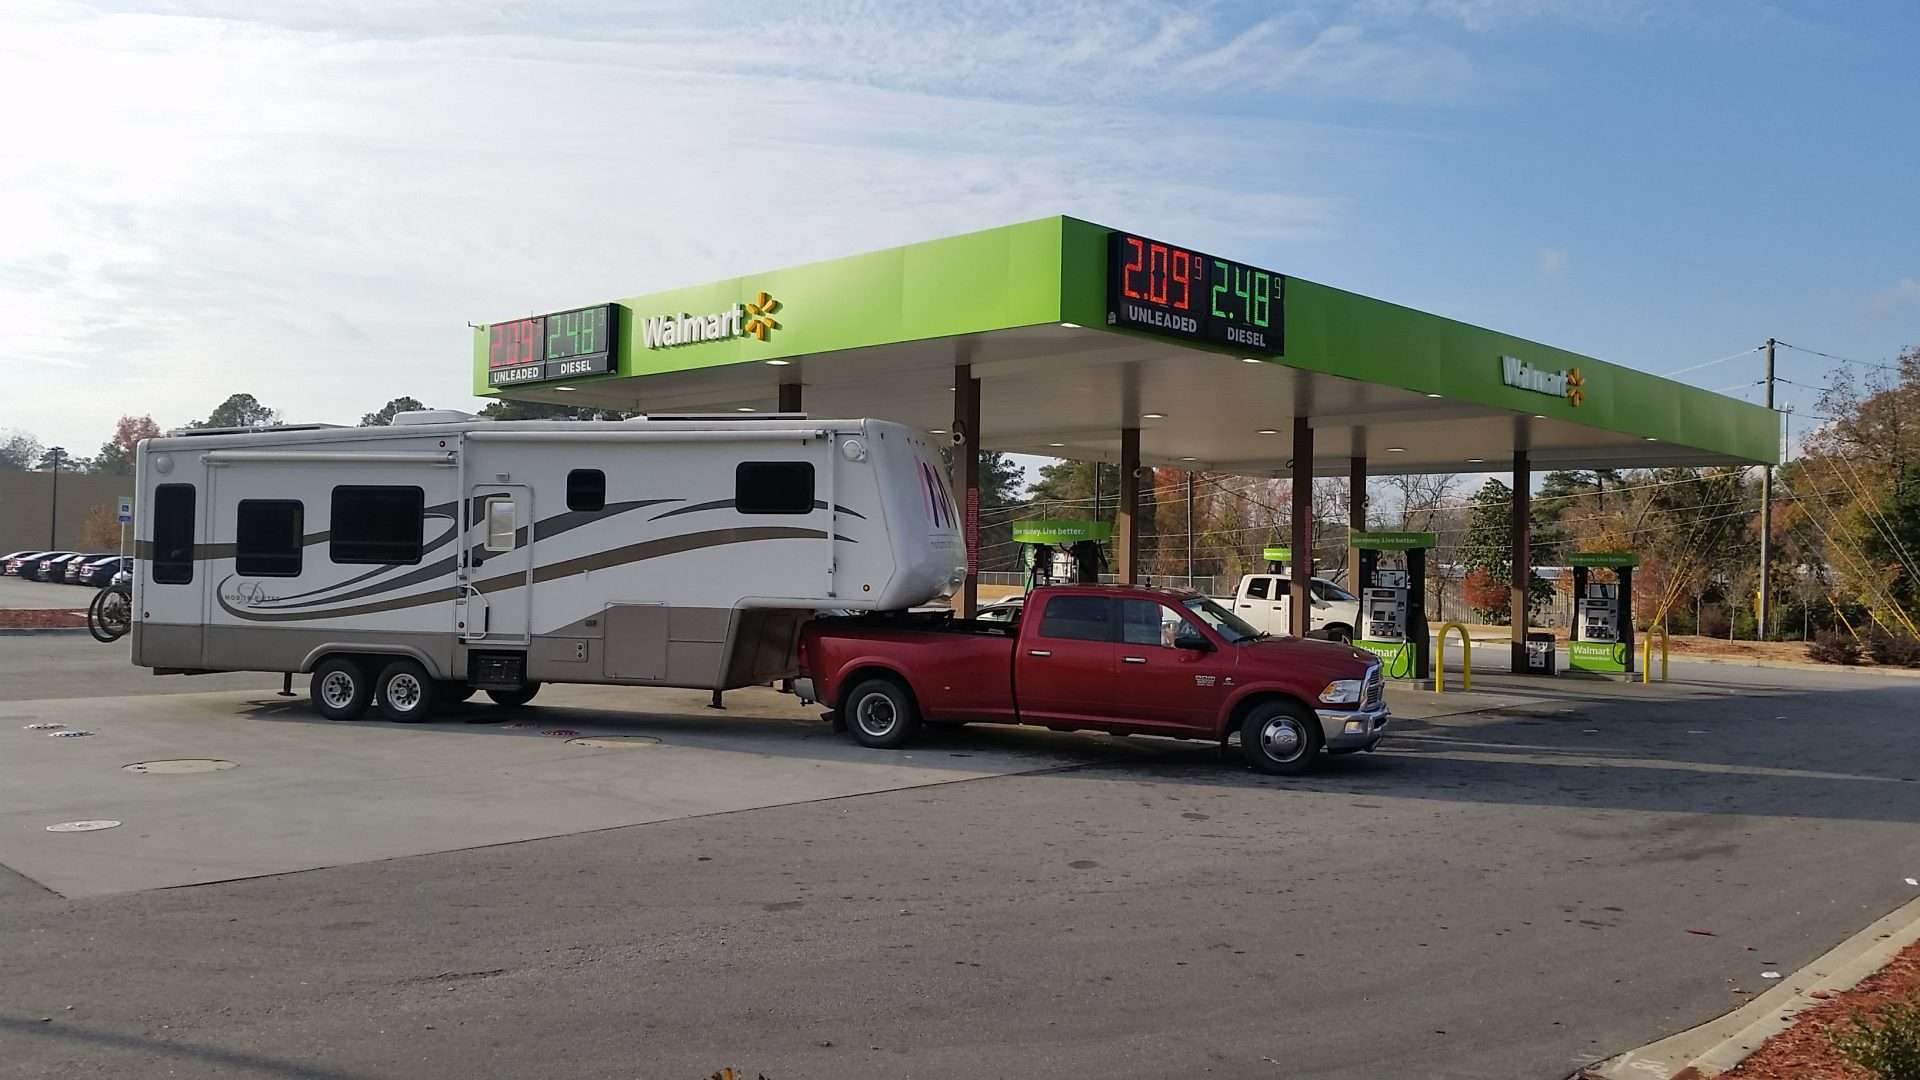 Truck hitched to RV parked at Walmart gas station